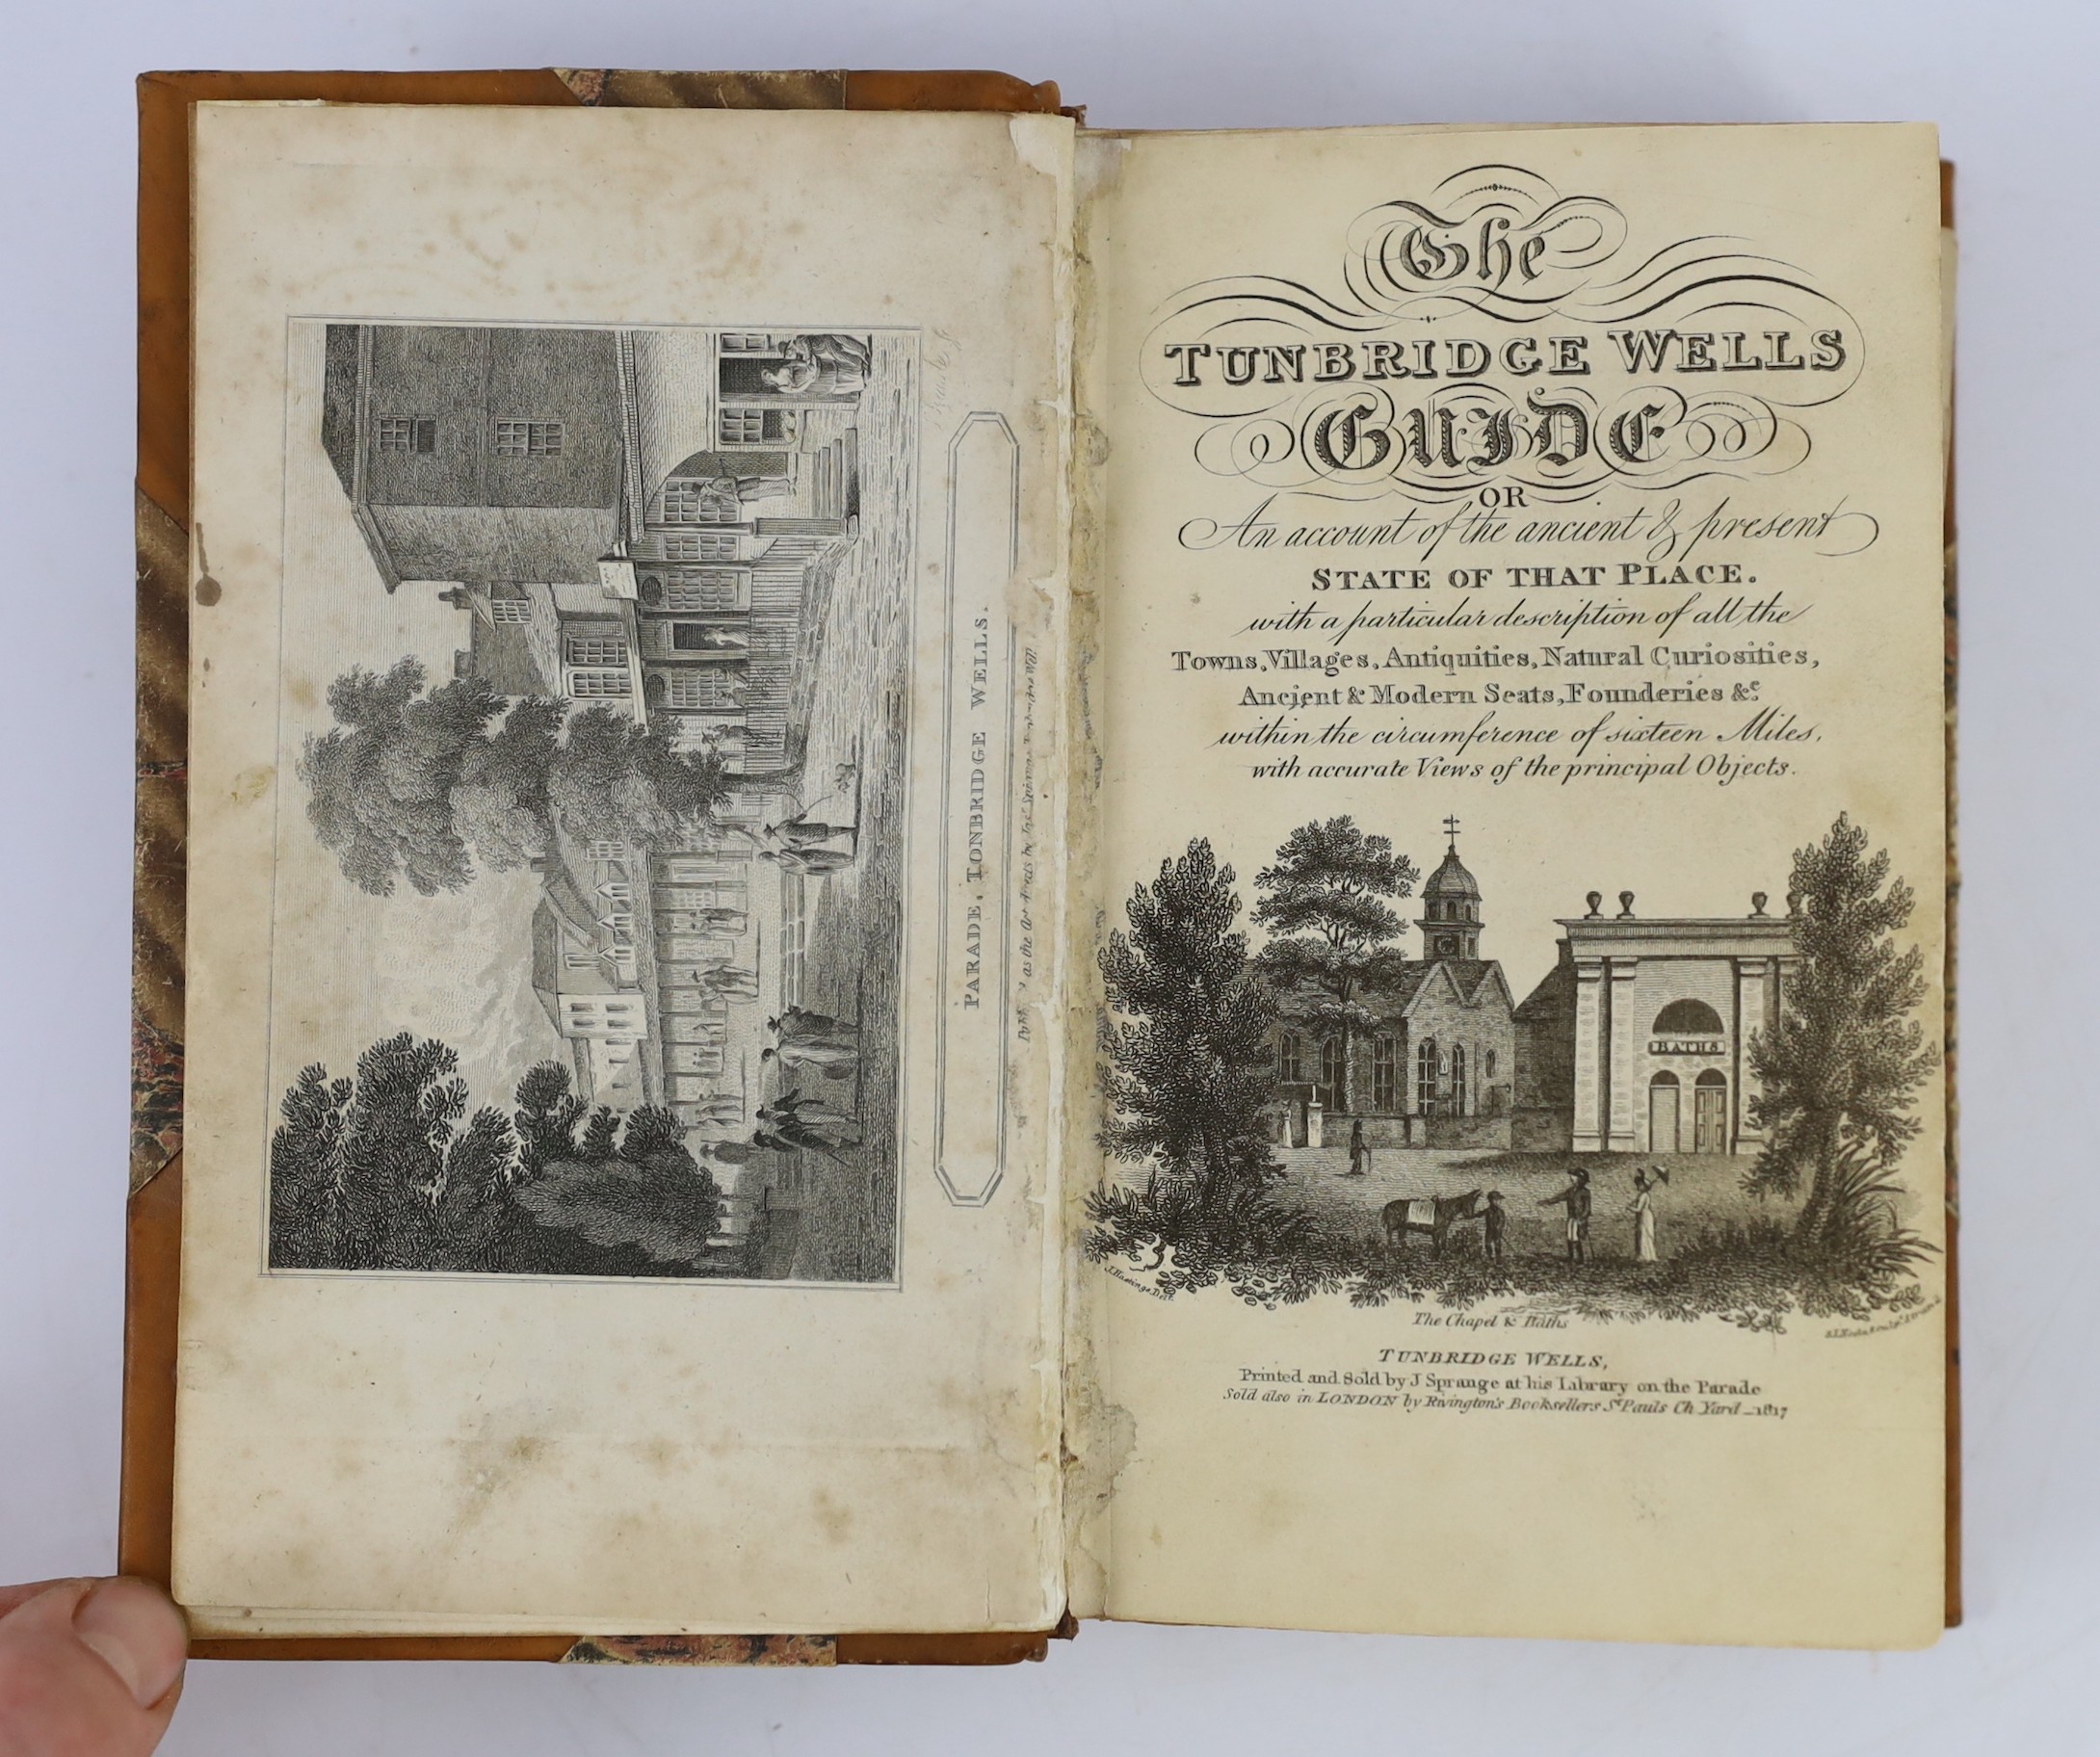 KENT, TUNBRIDGE WELLS: The Tunbridge Wells Guide...(new edition...with improvements). illus. title, engraved dedication, 13 plates and folded table; contemp. calf, gilt ruled spine and red label, sm. 8vo. Tunbridge Wells